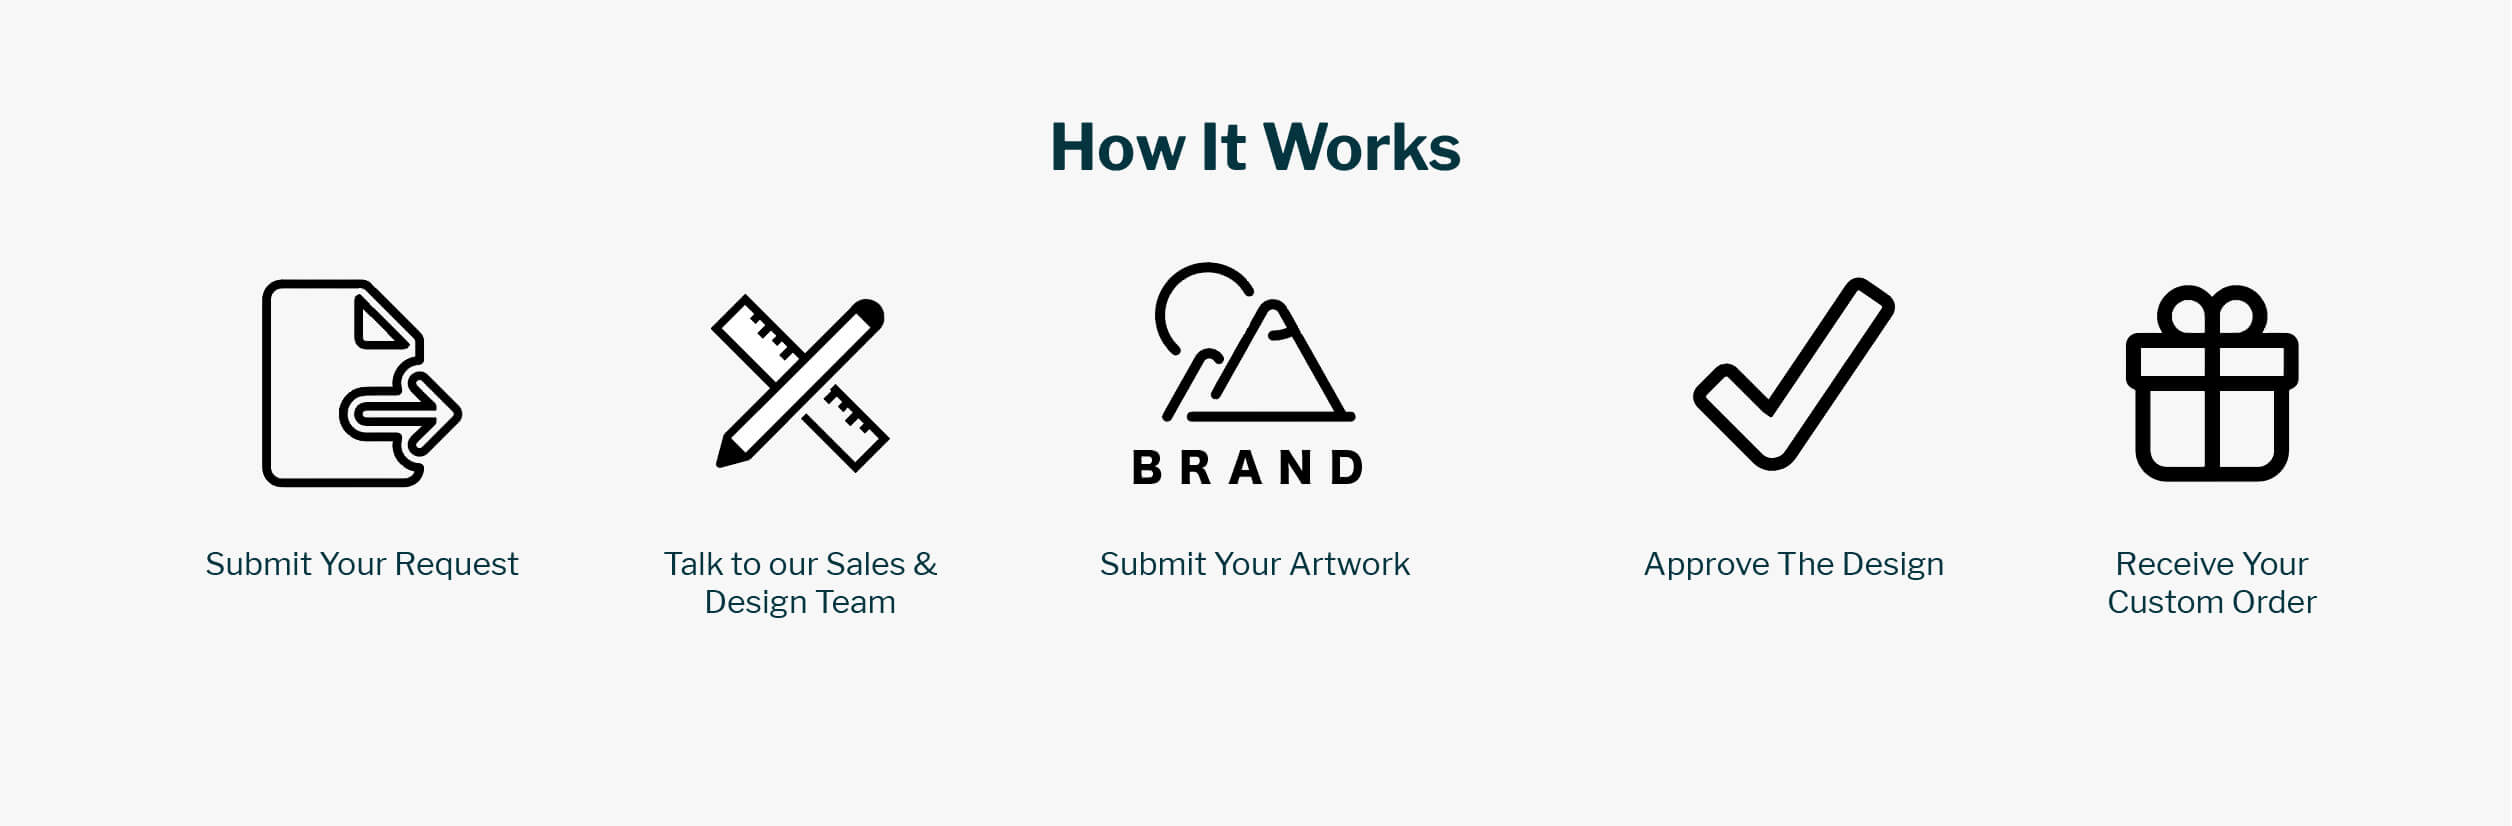 how it works: submit your request, talk to our sales team, submit your artwork, approve the design, and receive your custom order